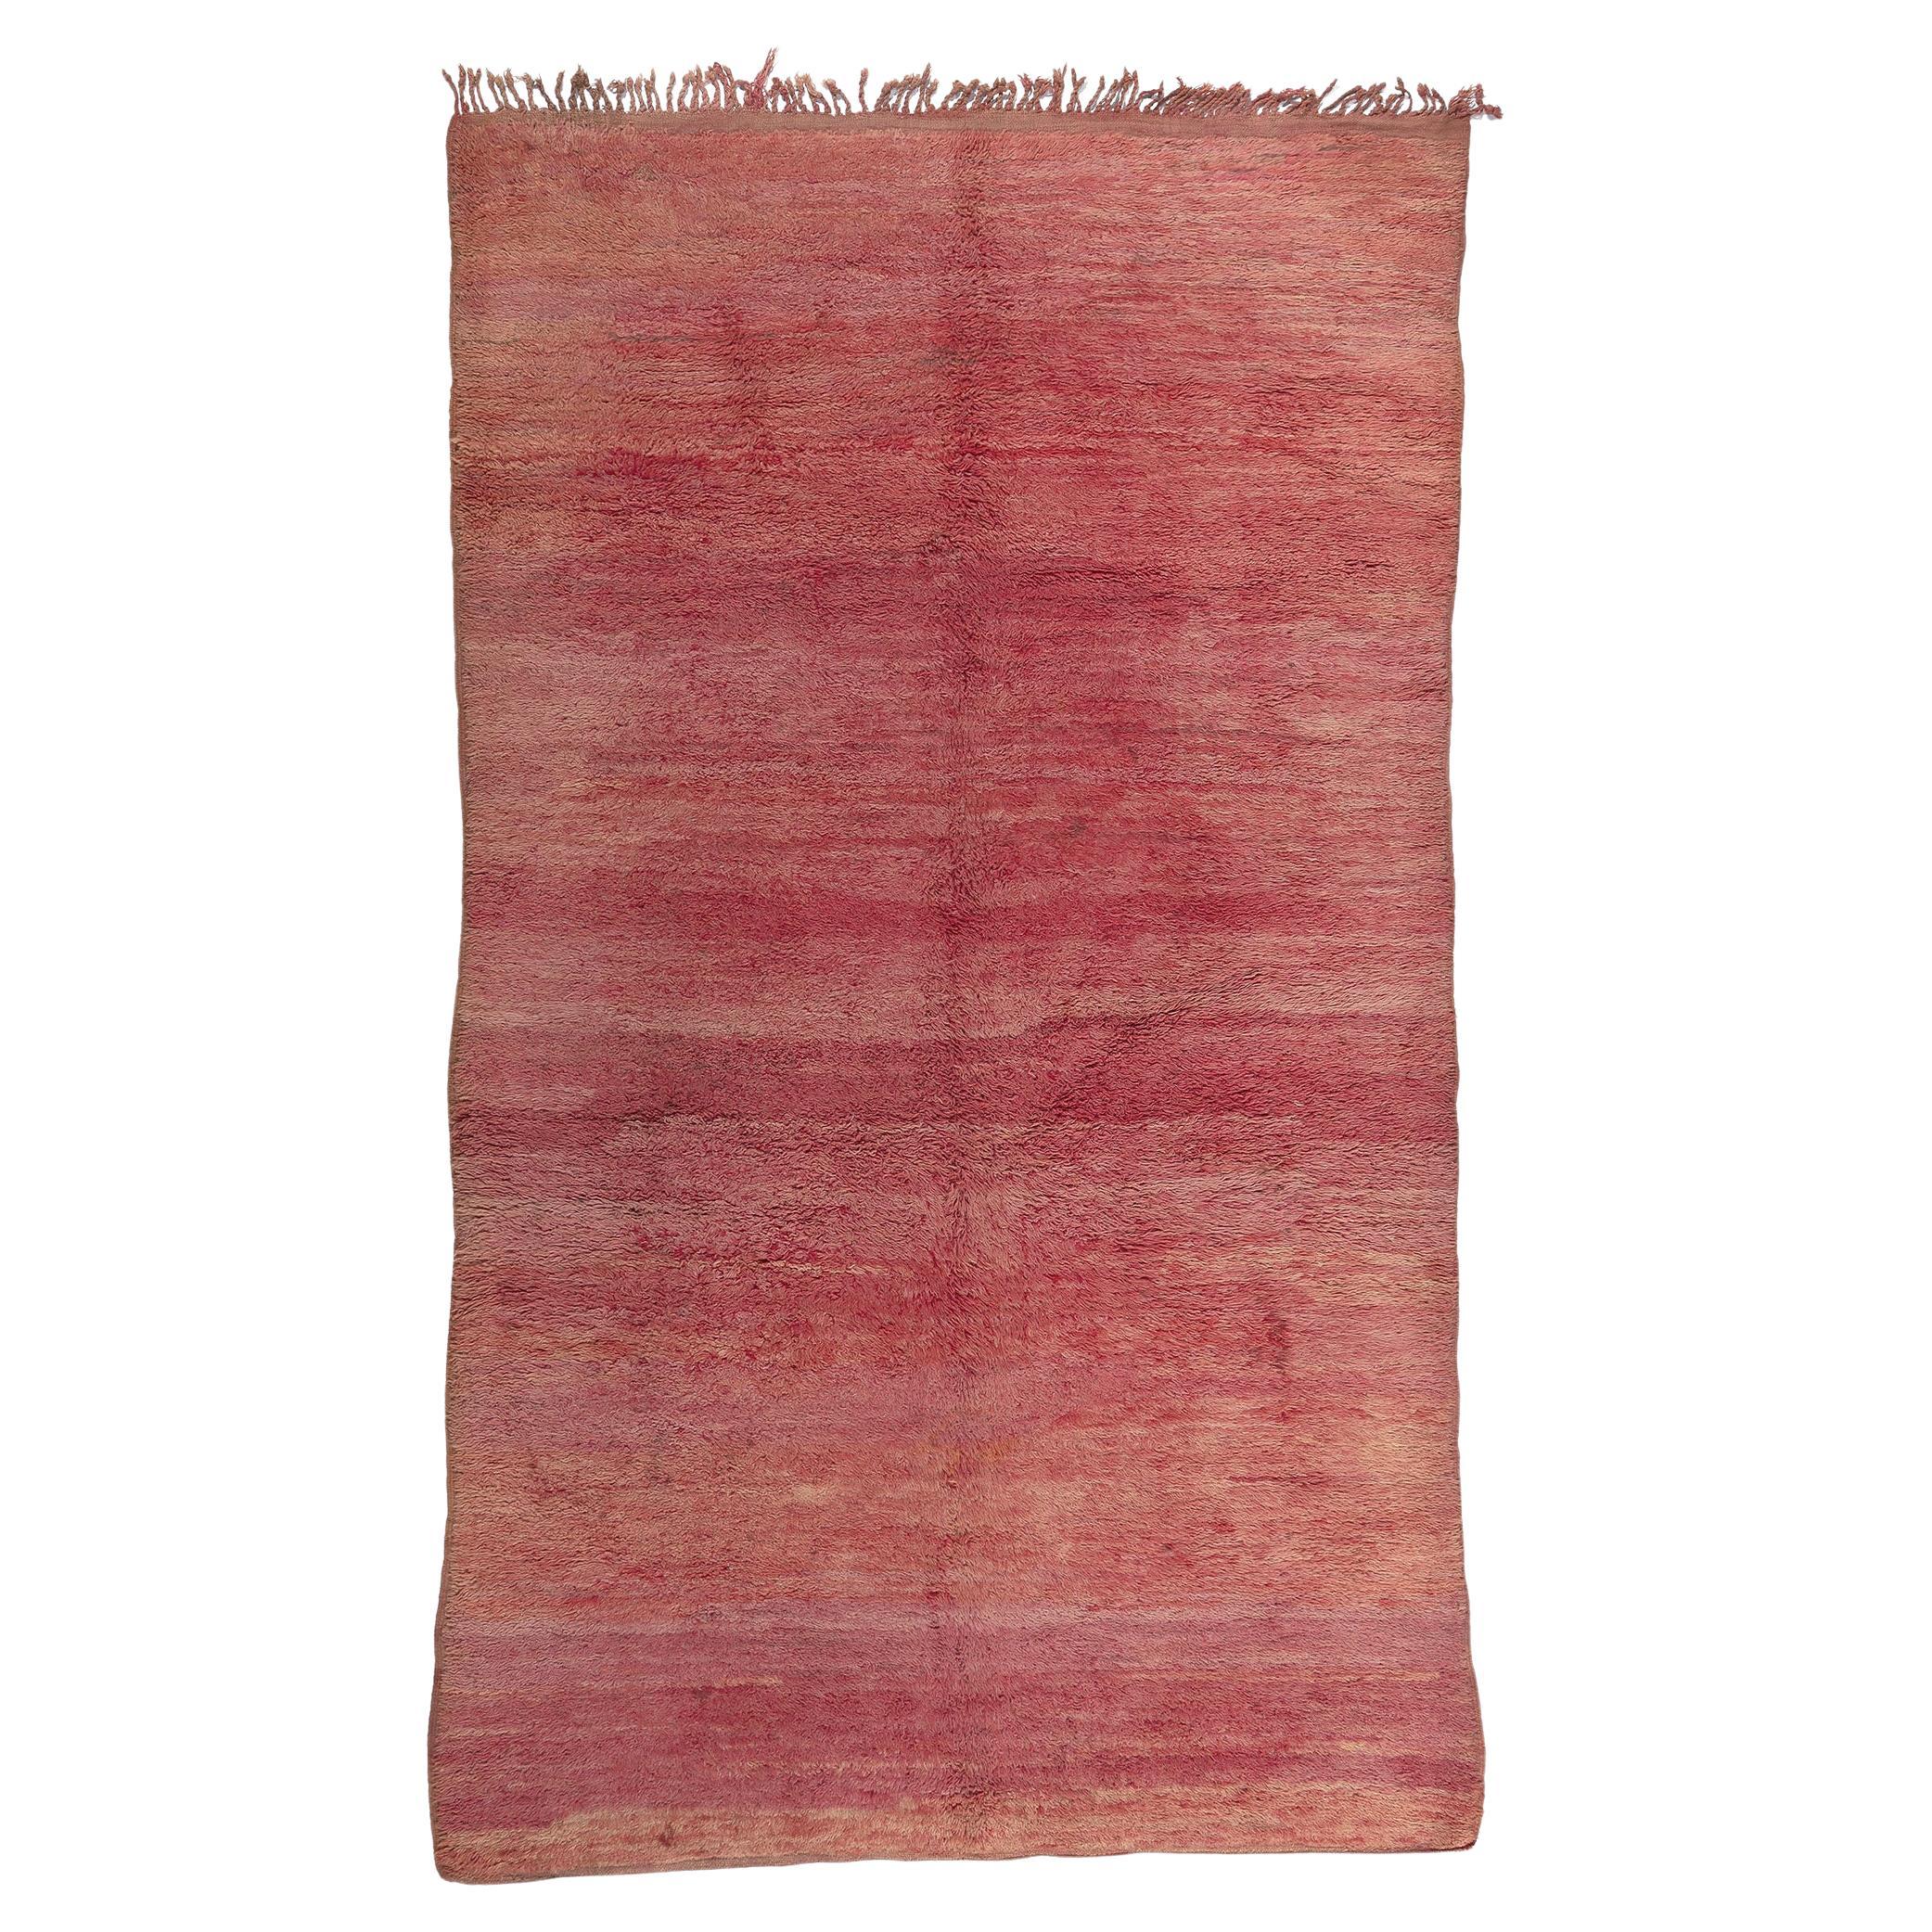 Vintage Pink Beni Mrirt Moroccan Rug, Nomadic Charm Meets Abstract Expressionism